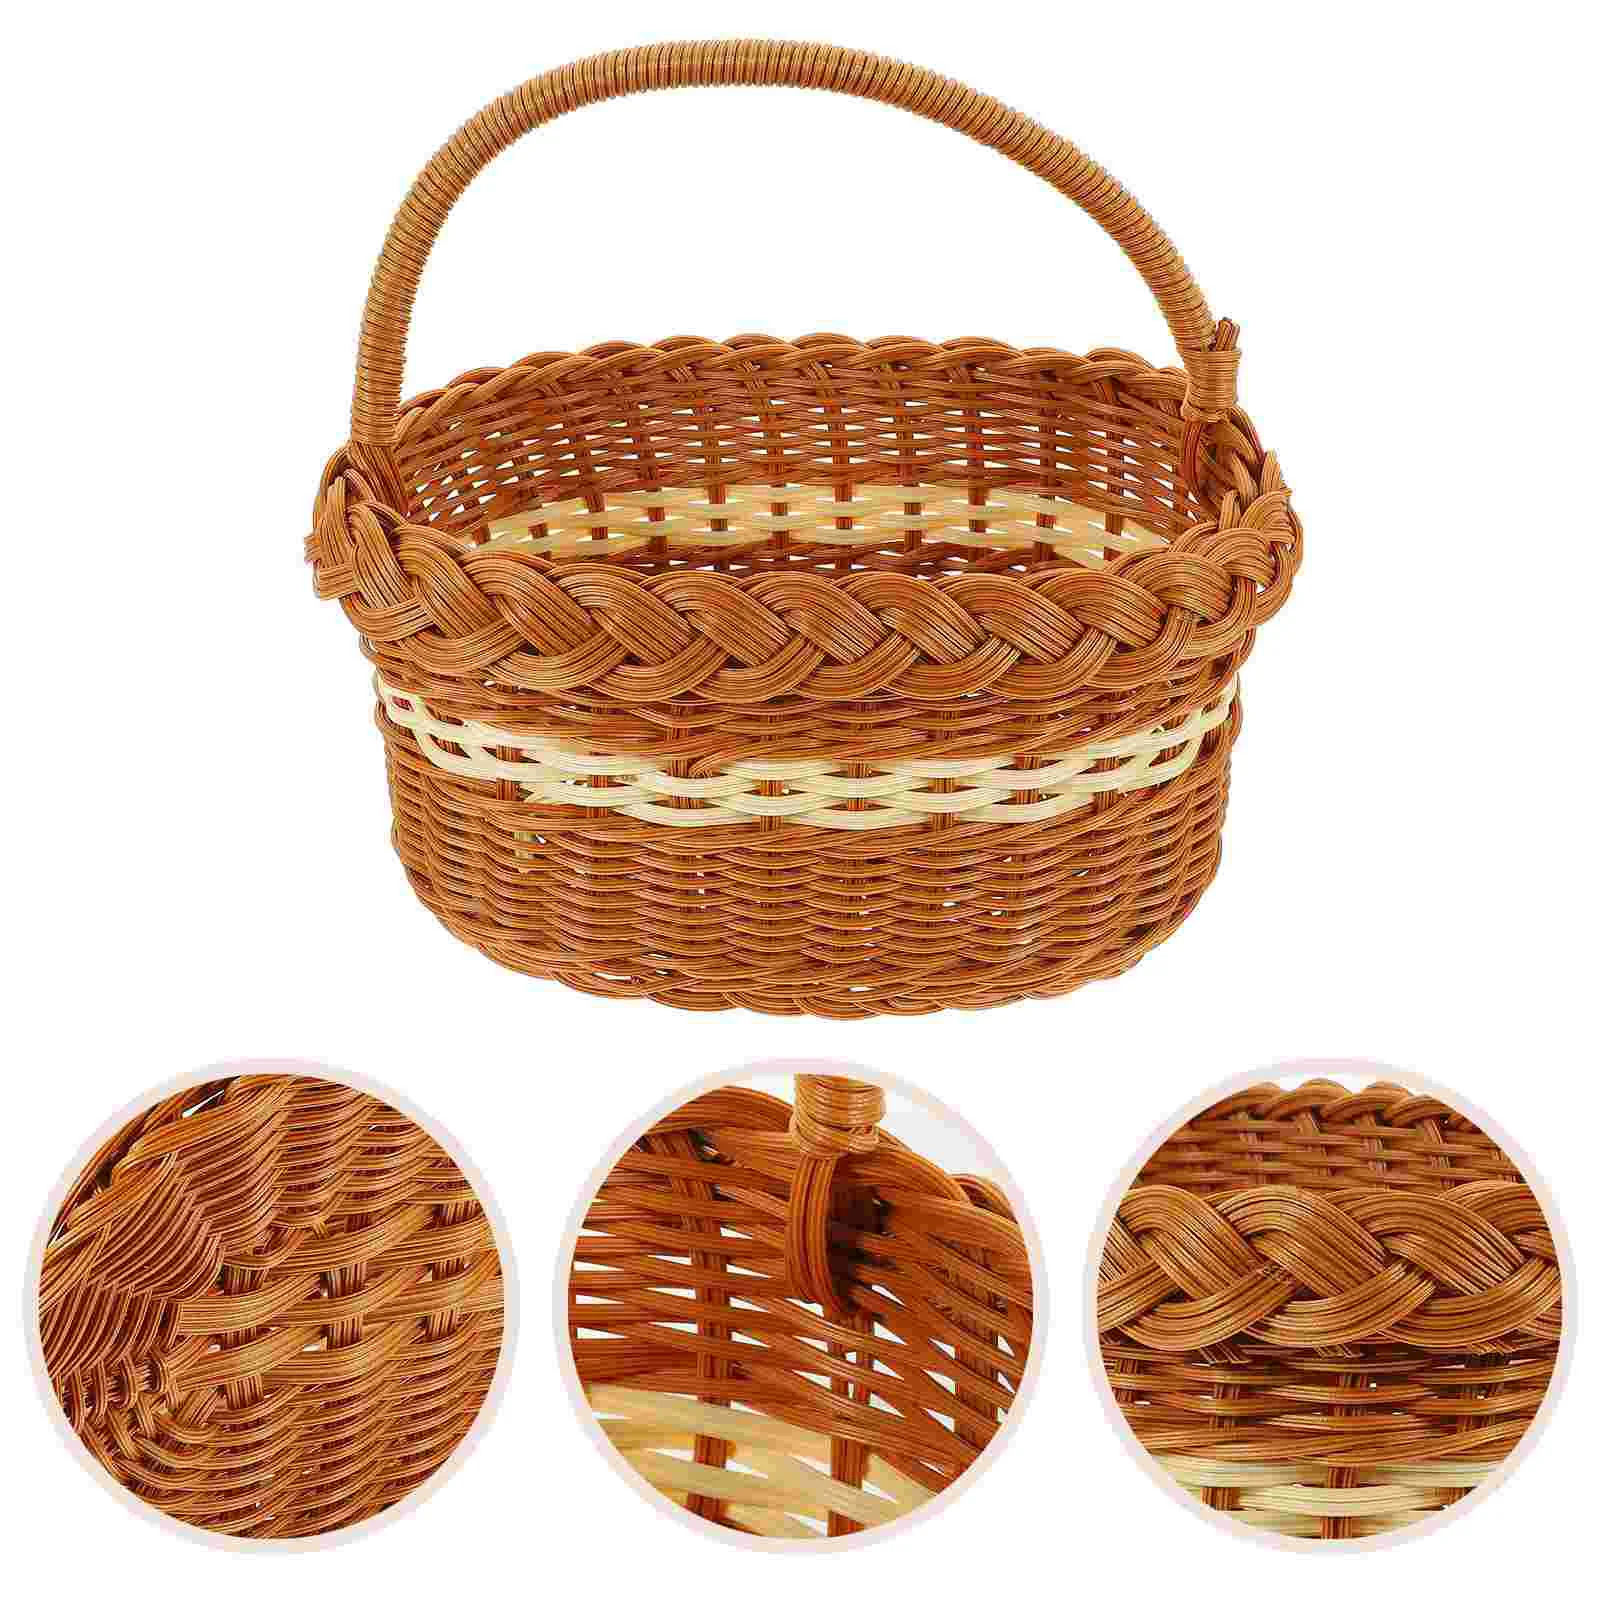 

Basket Storage Flower Organizer Baskets Picnic Wicker Sundries Shopping Woven Gathering Container Candy Empty Props Photography